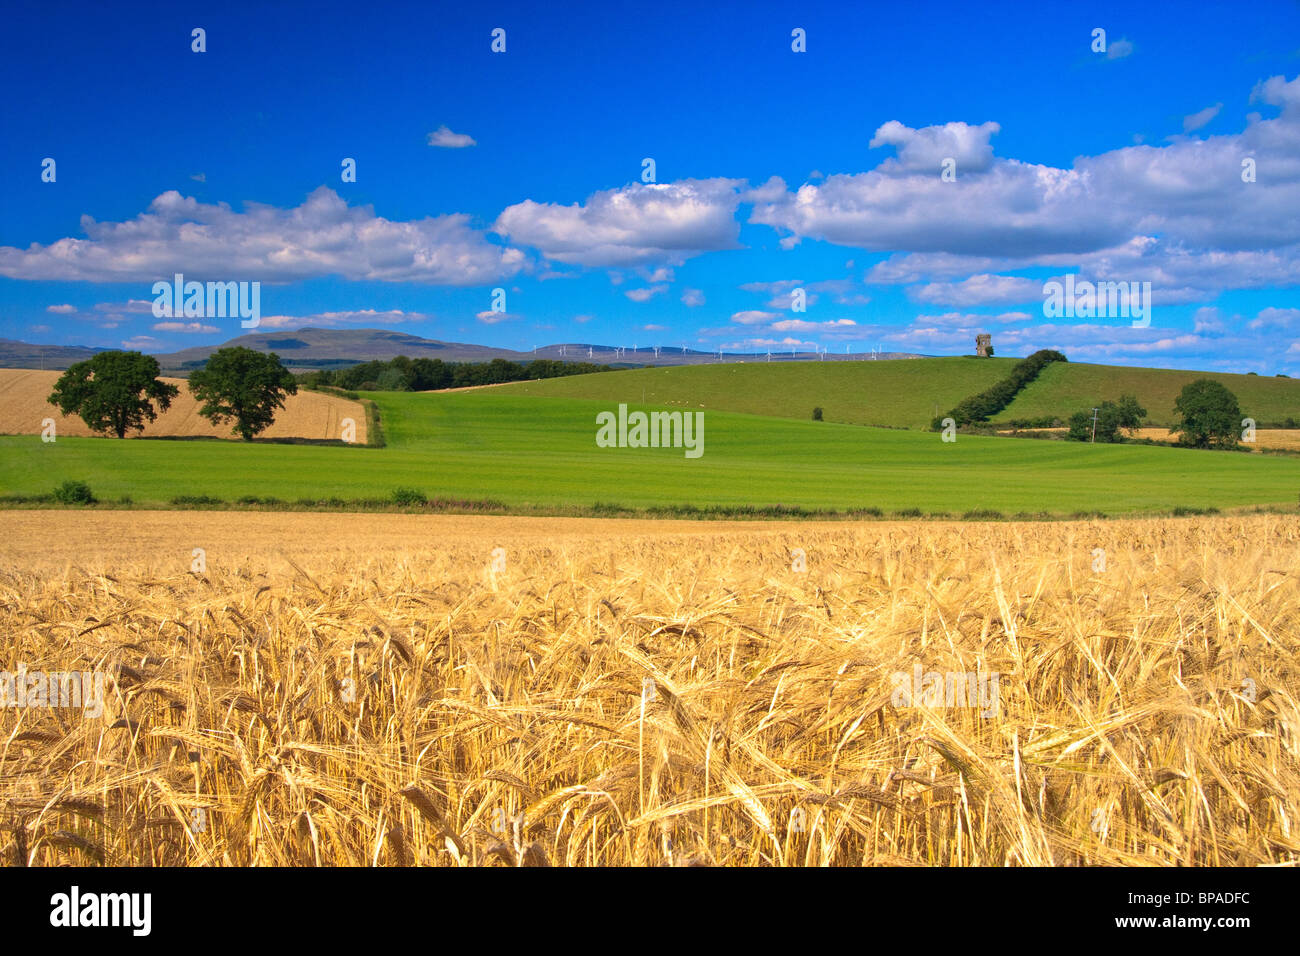 Summer Farmland, with golden wheat in the foreground under blue skies Stock Photo